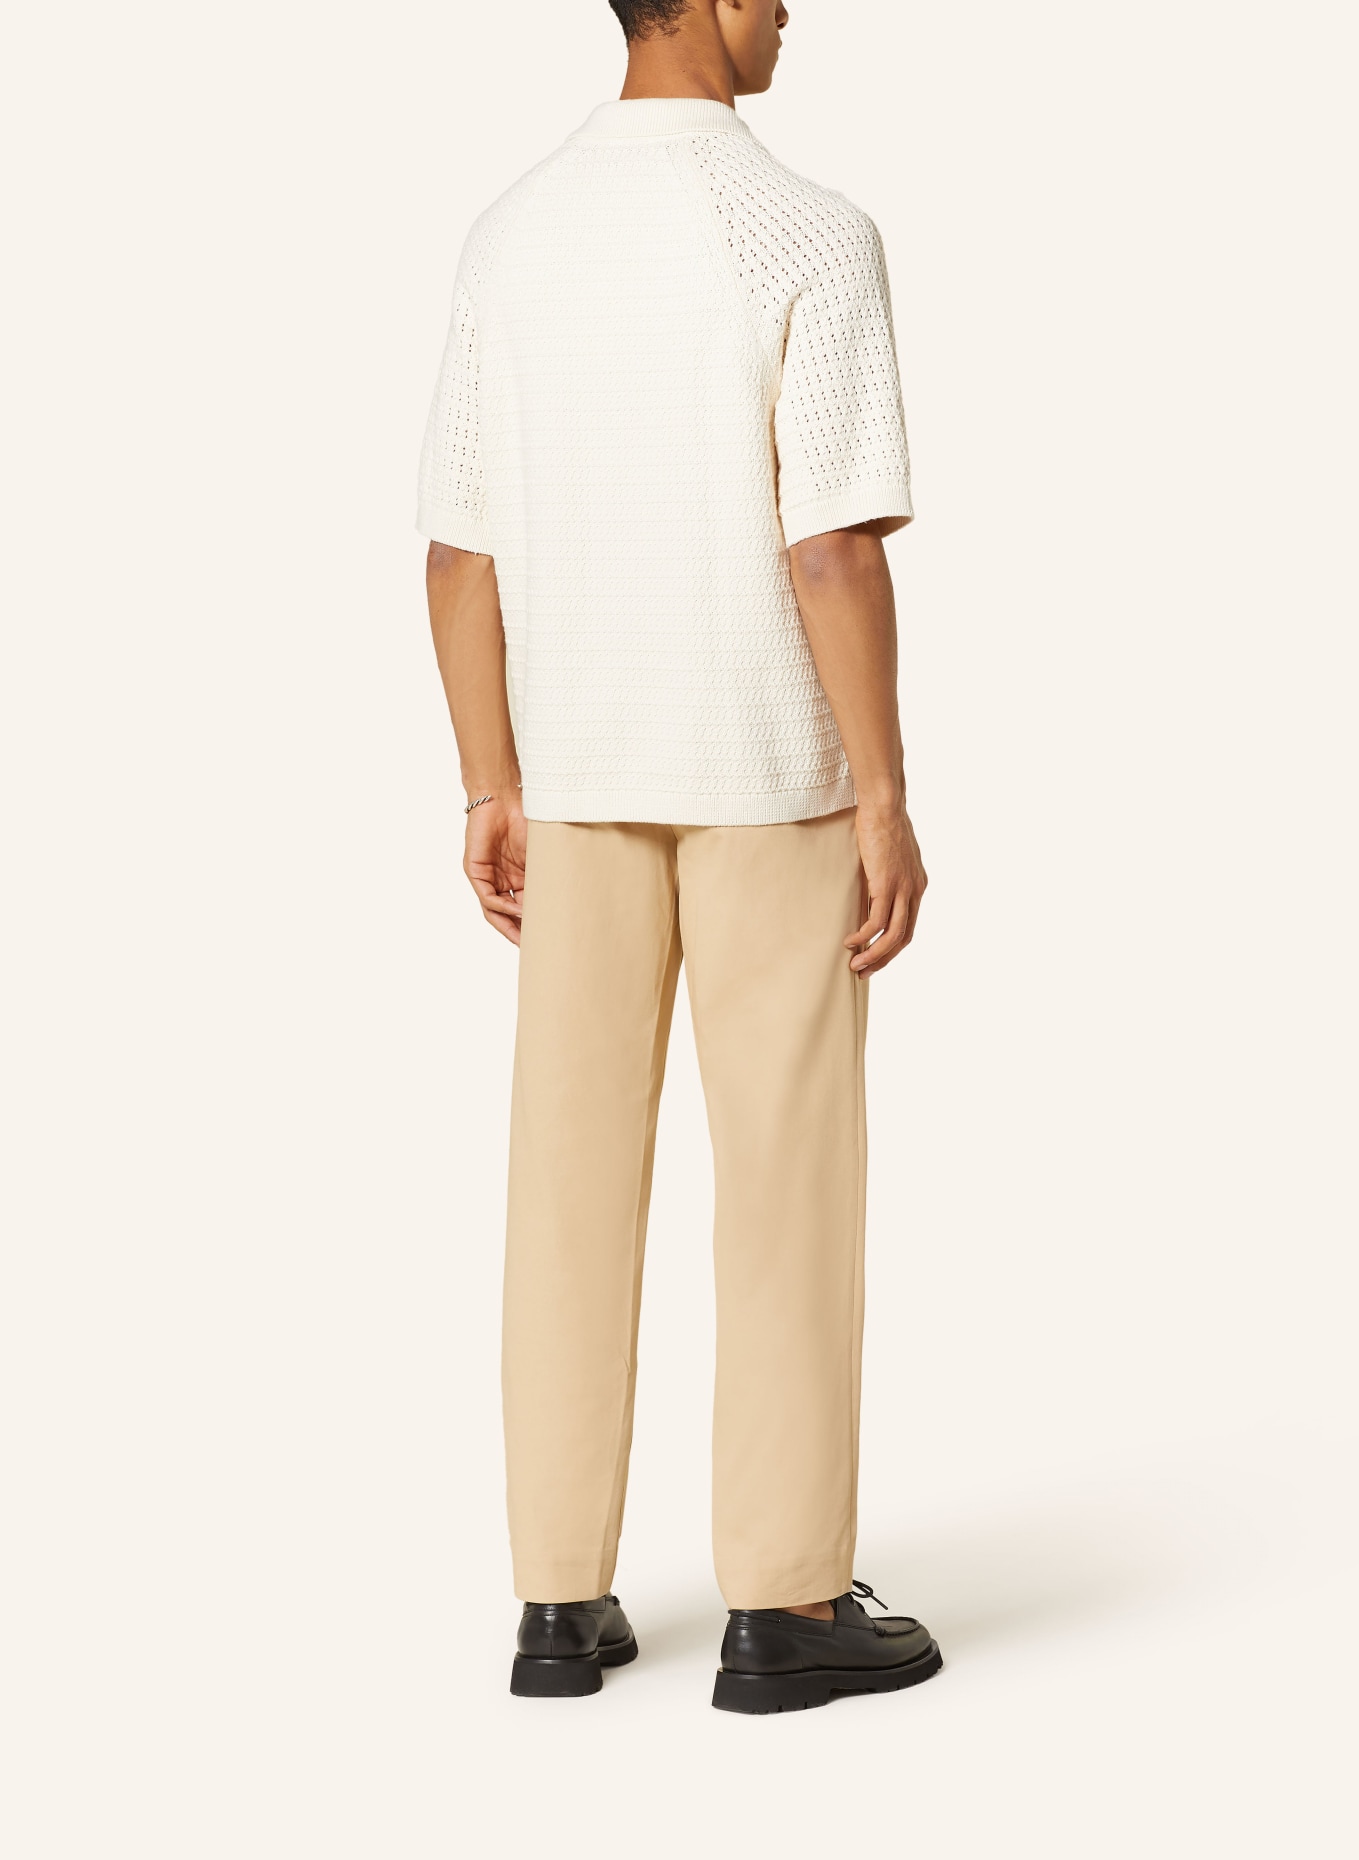 COS Knit shirt relaxed fit, Color: CREAM (Image 3)